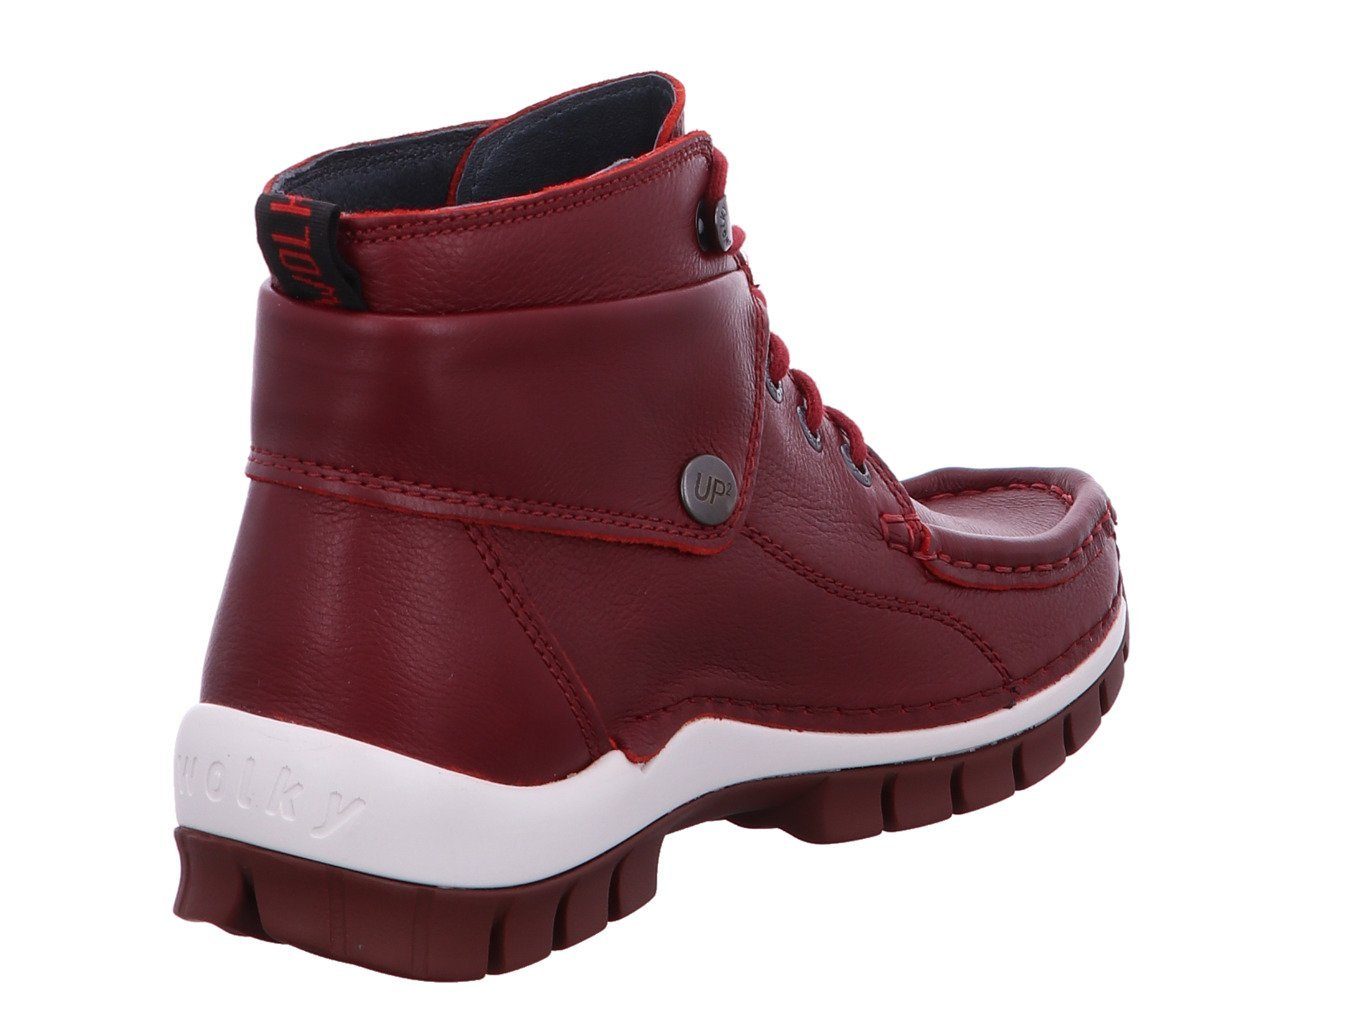 WOLKY Jump Winter Ankleboots